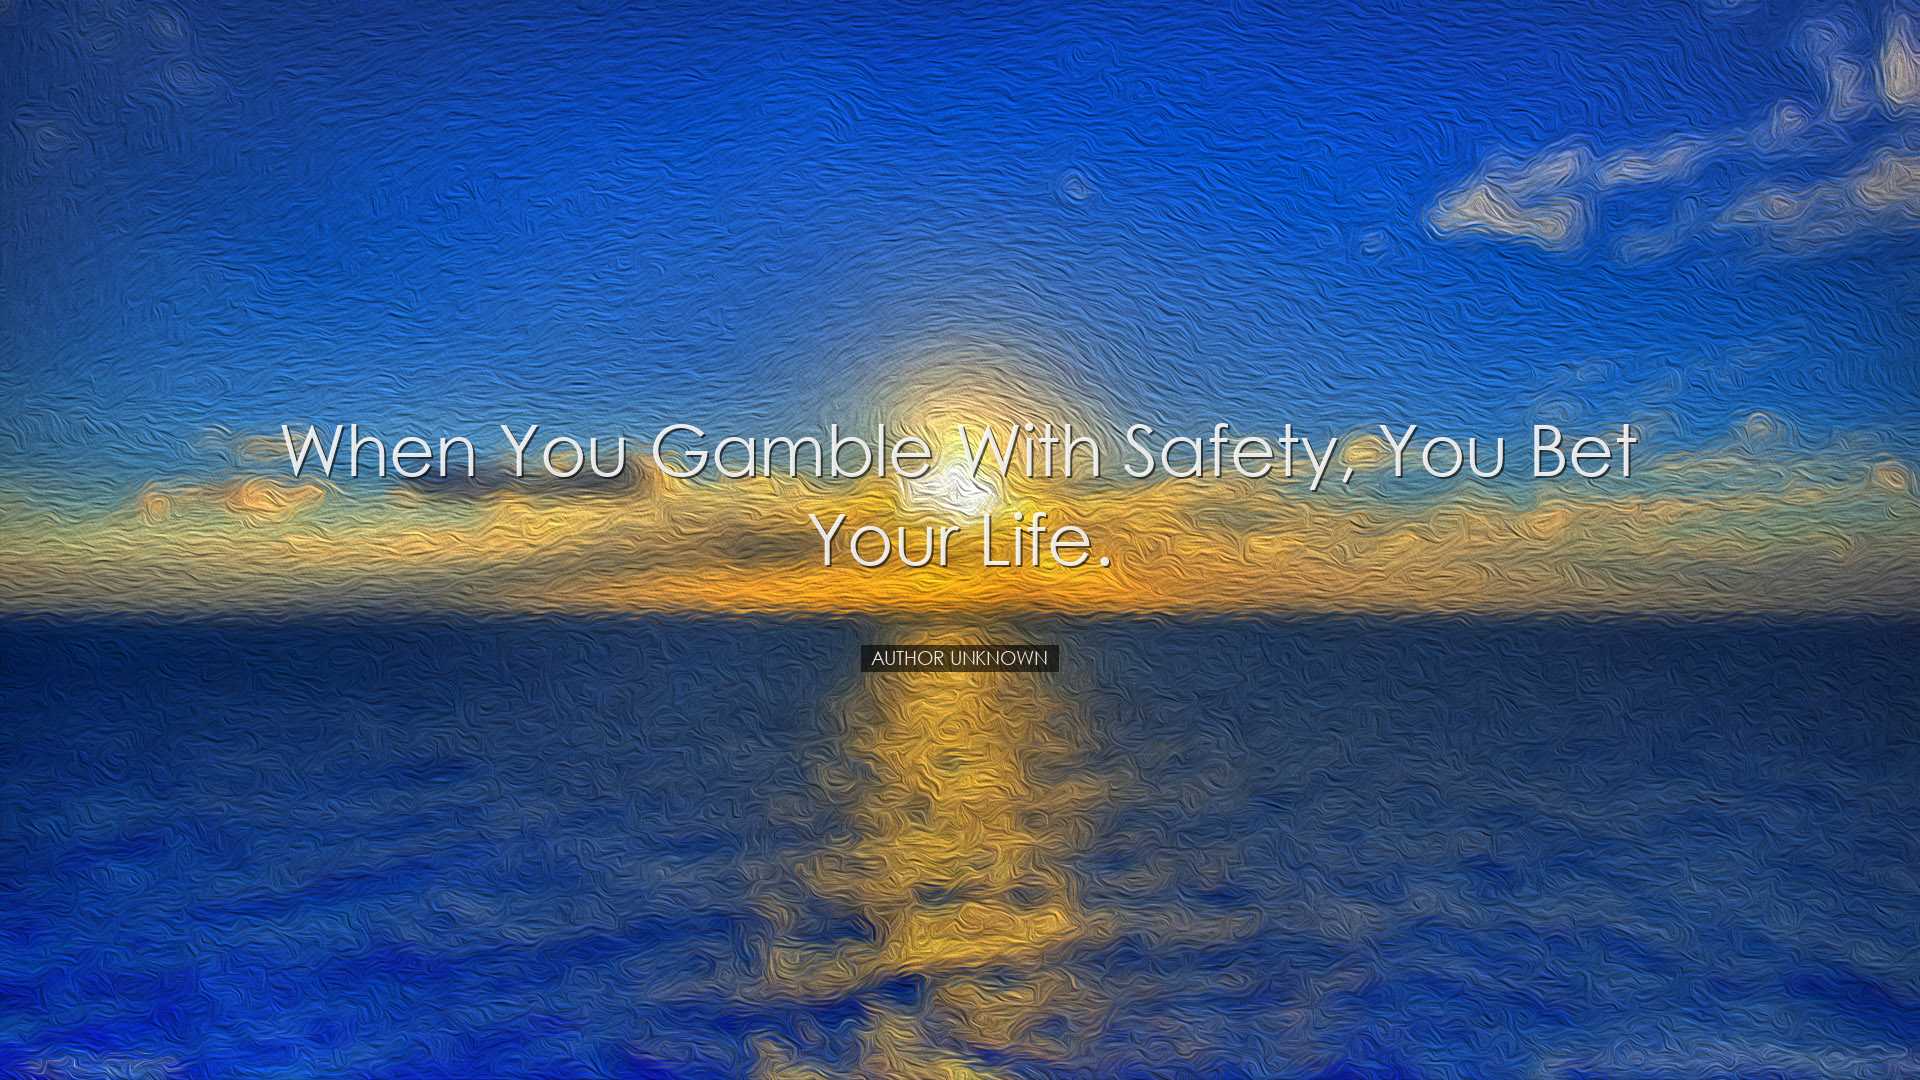 When you gamble with safety, you bet your life. - Author unknown